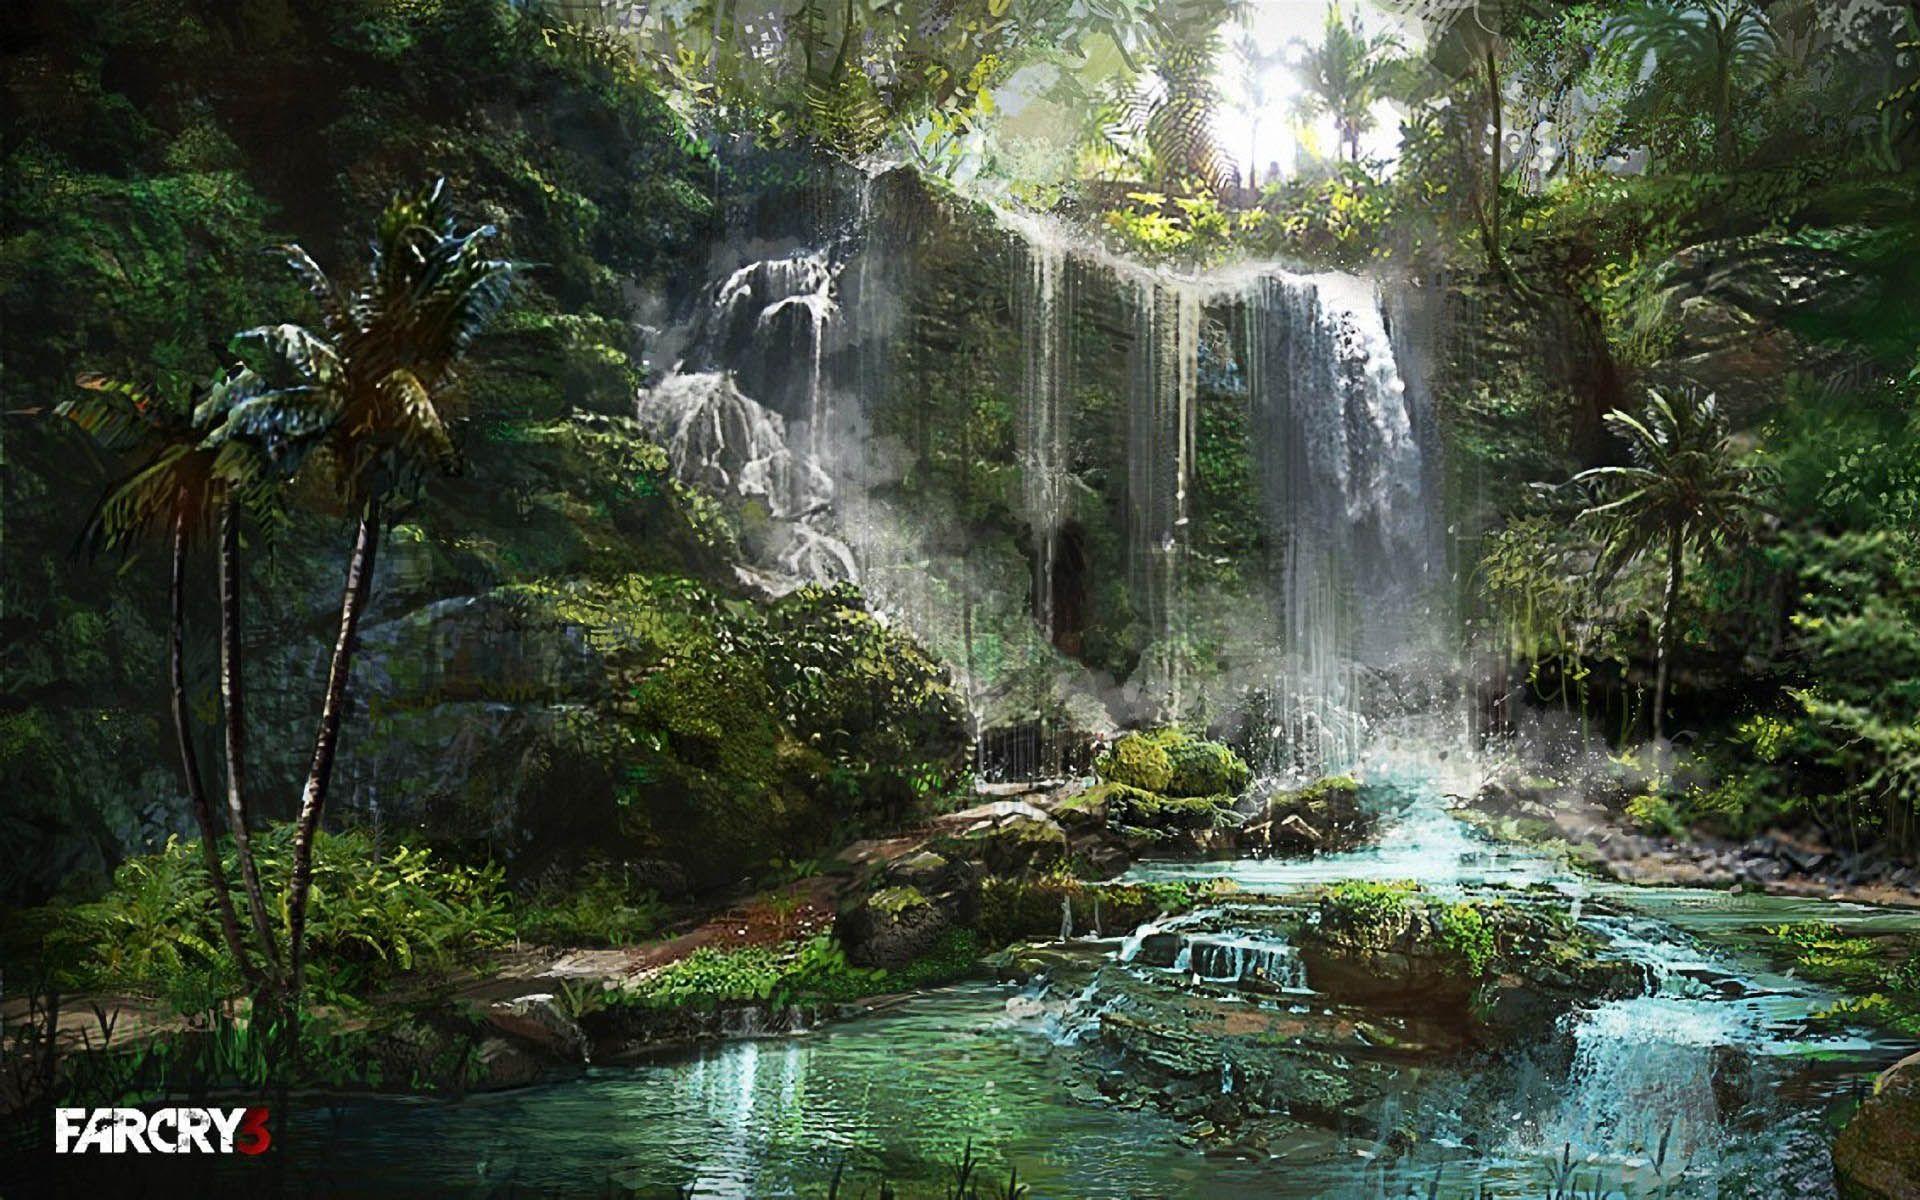 Top Far Cry 3 HQ Picture, Far Cry 3 WD 69 Wallpaper